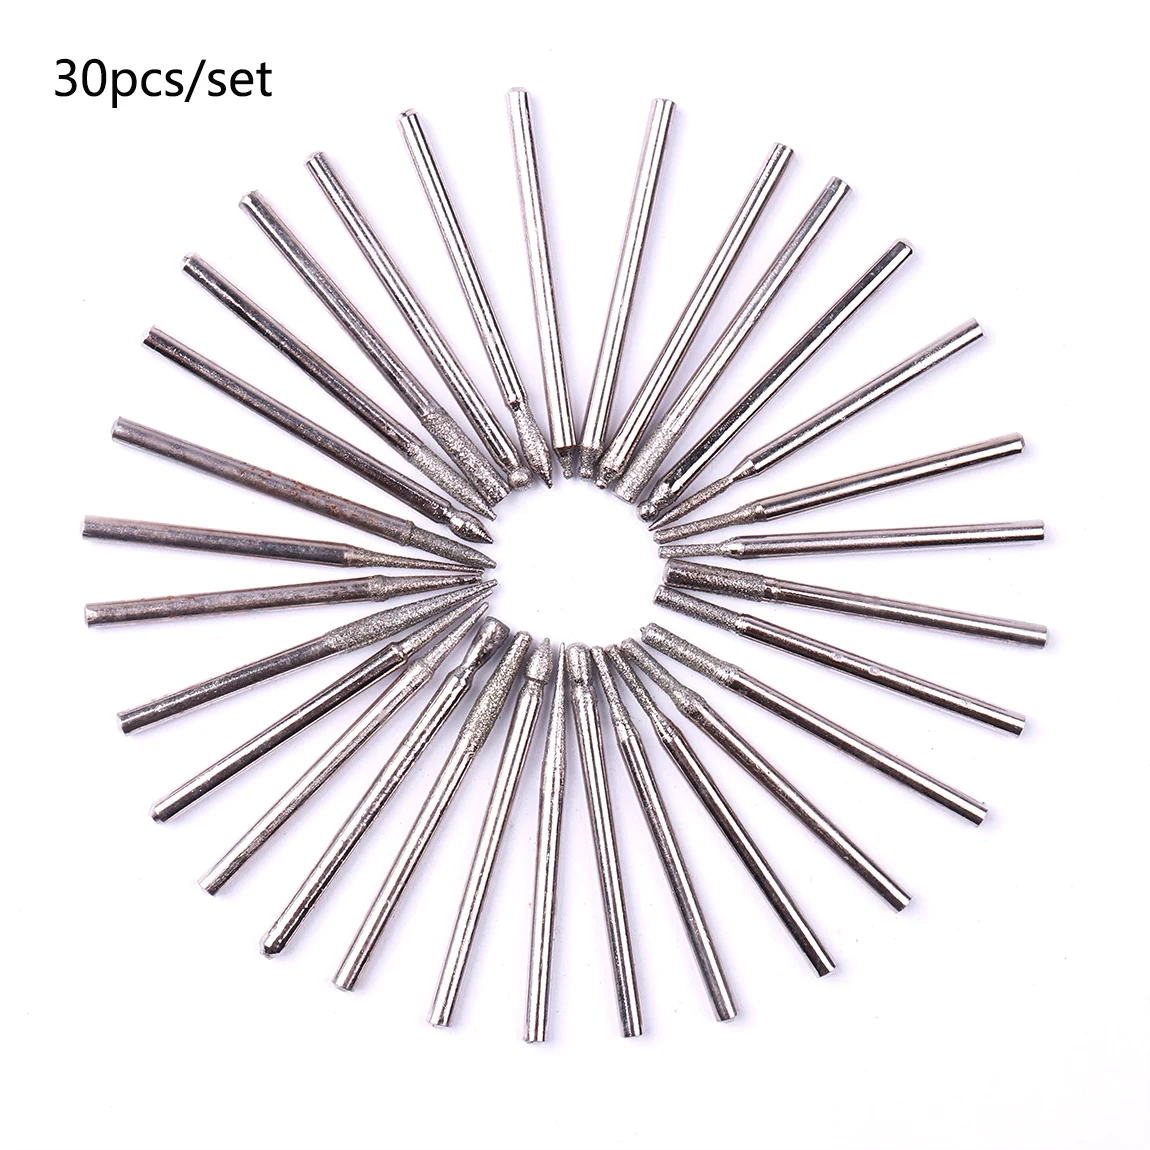 CHEERBRIGHT 30Pc Diamond Coated Cuticle Removal Nail Drill Set Rotary Grinding Burrs Glass Drill Bit DIYTool Set free shipping 30pc diamond burs bur bit set dremel 3mm shank rotary tool drill bit for grinding jade stone marble glass